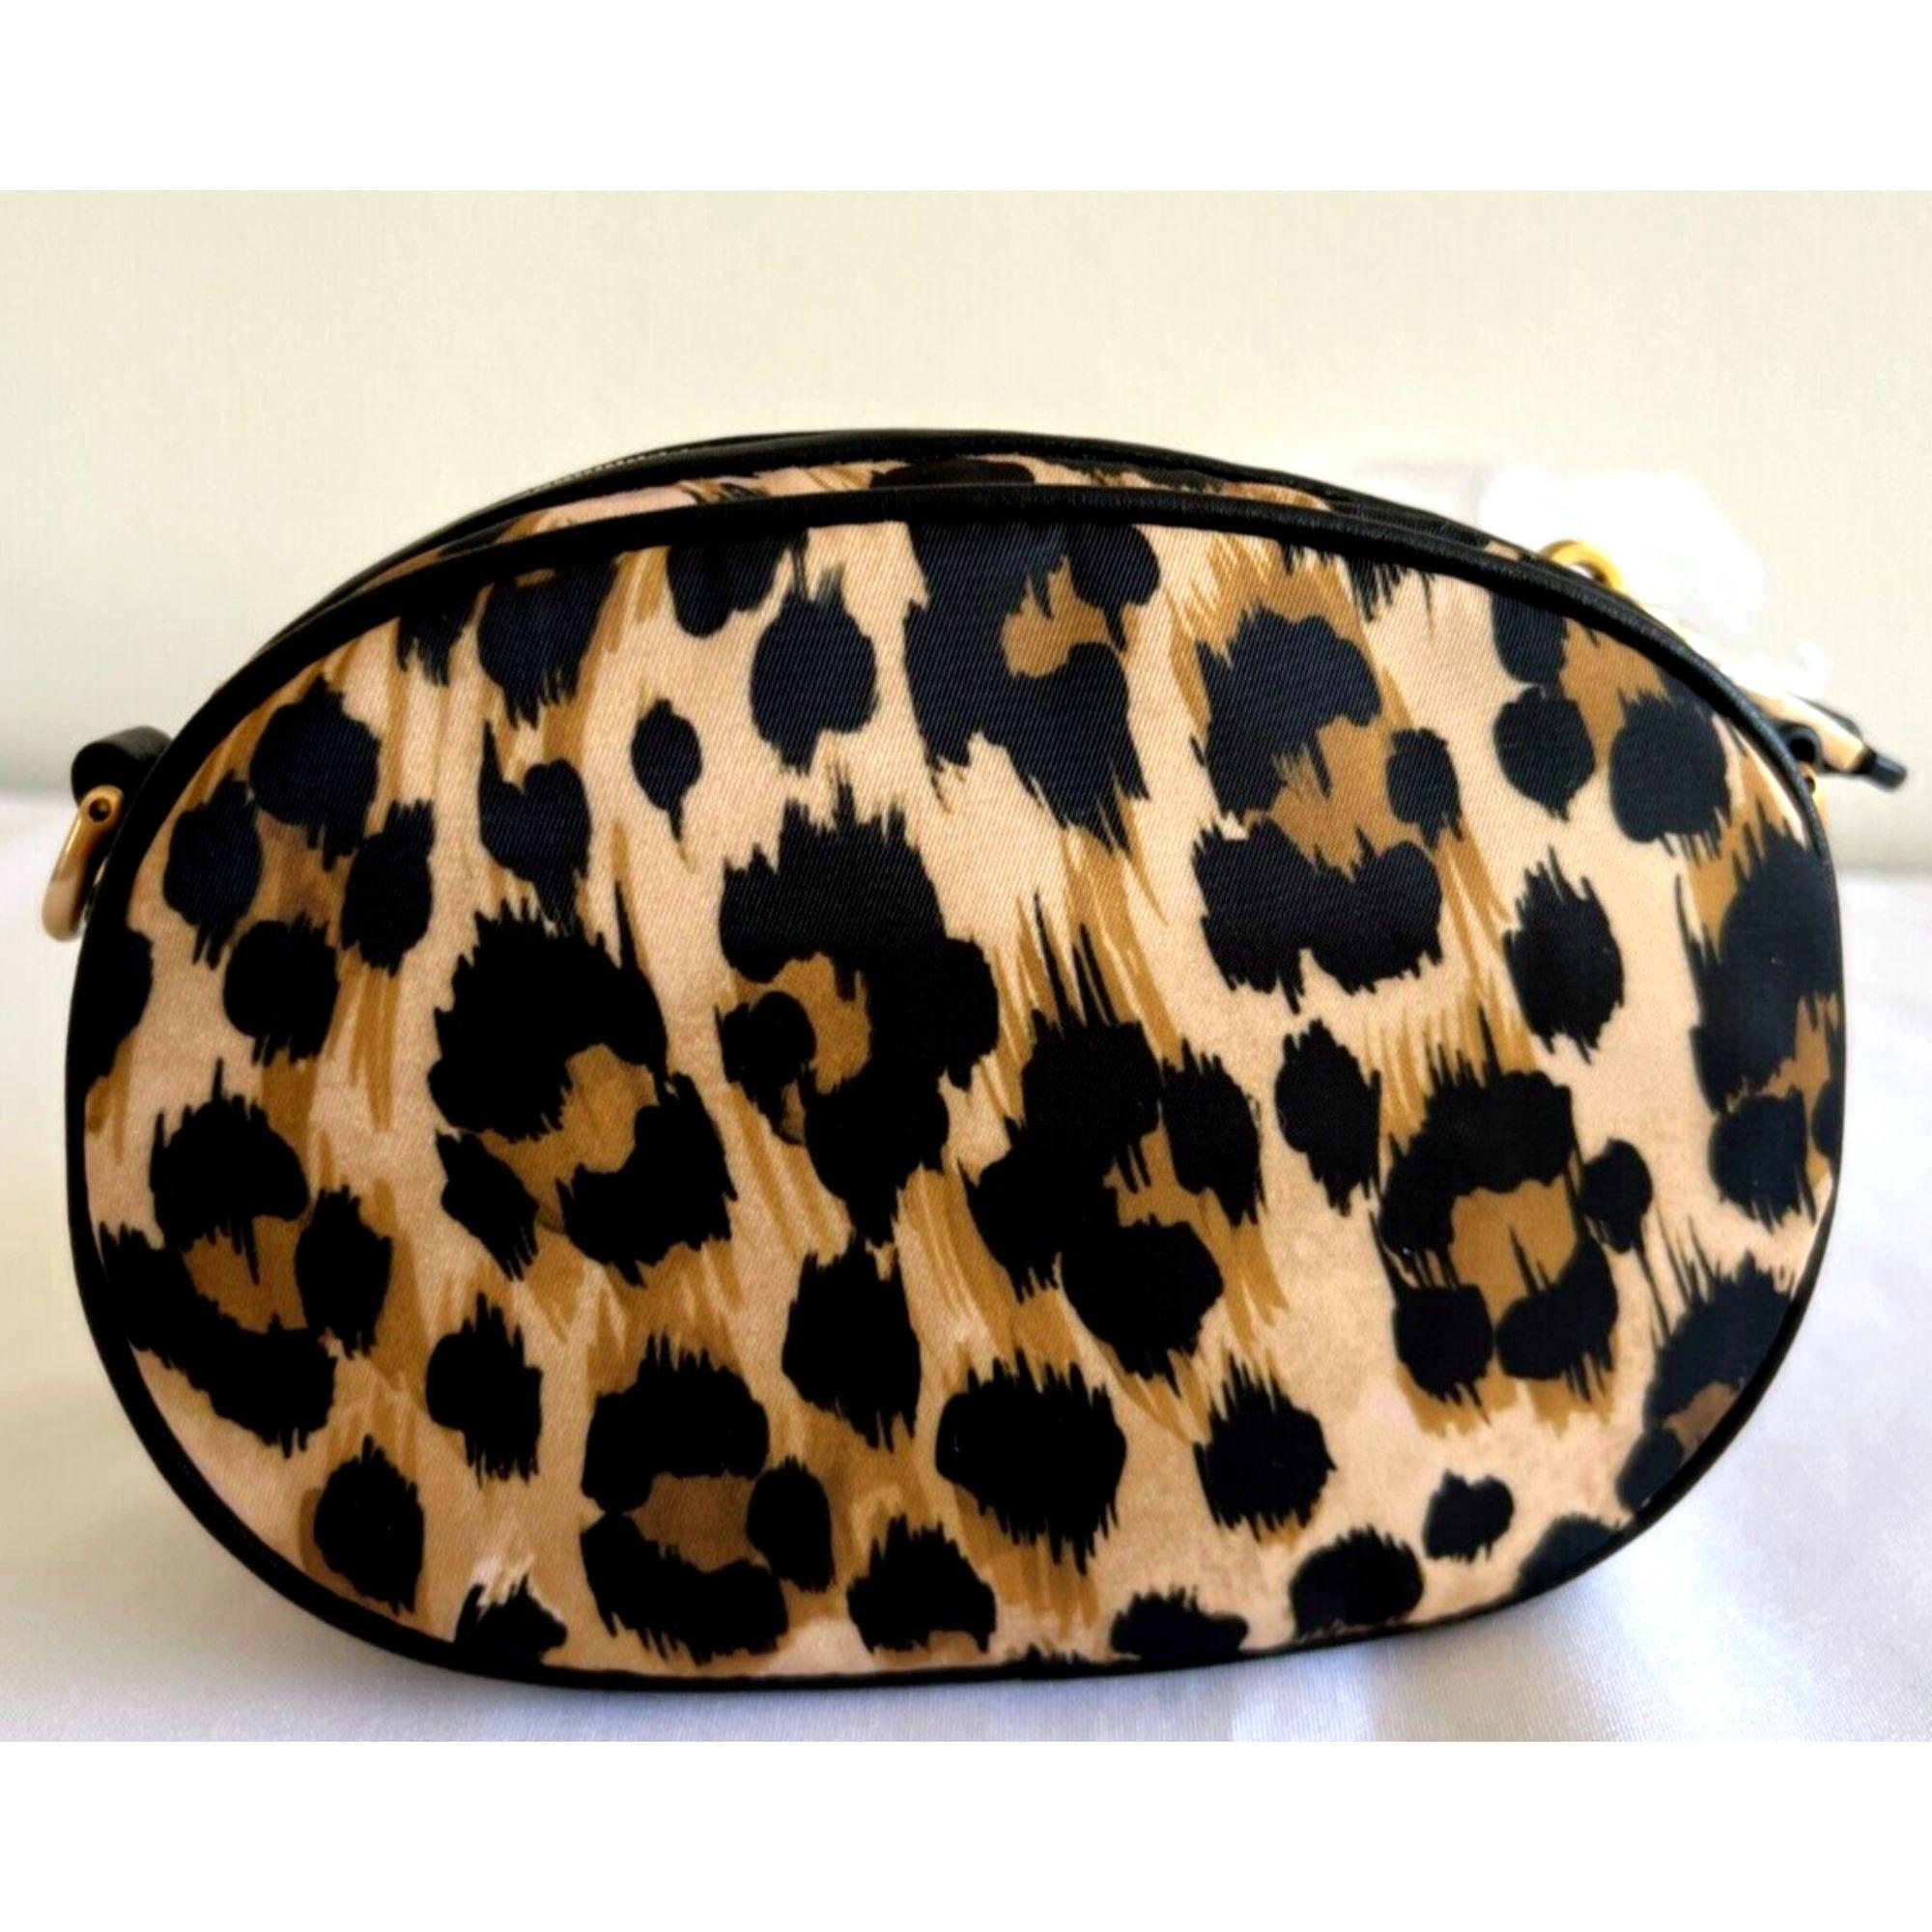 AW21 Moschino Couture Allover Leopard Print Shoulder Bag by Jeremy Scott For Sale 1